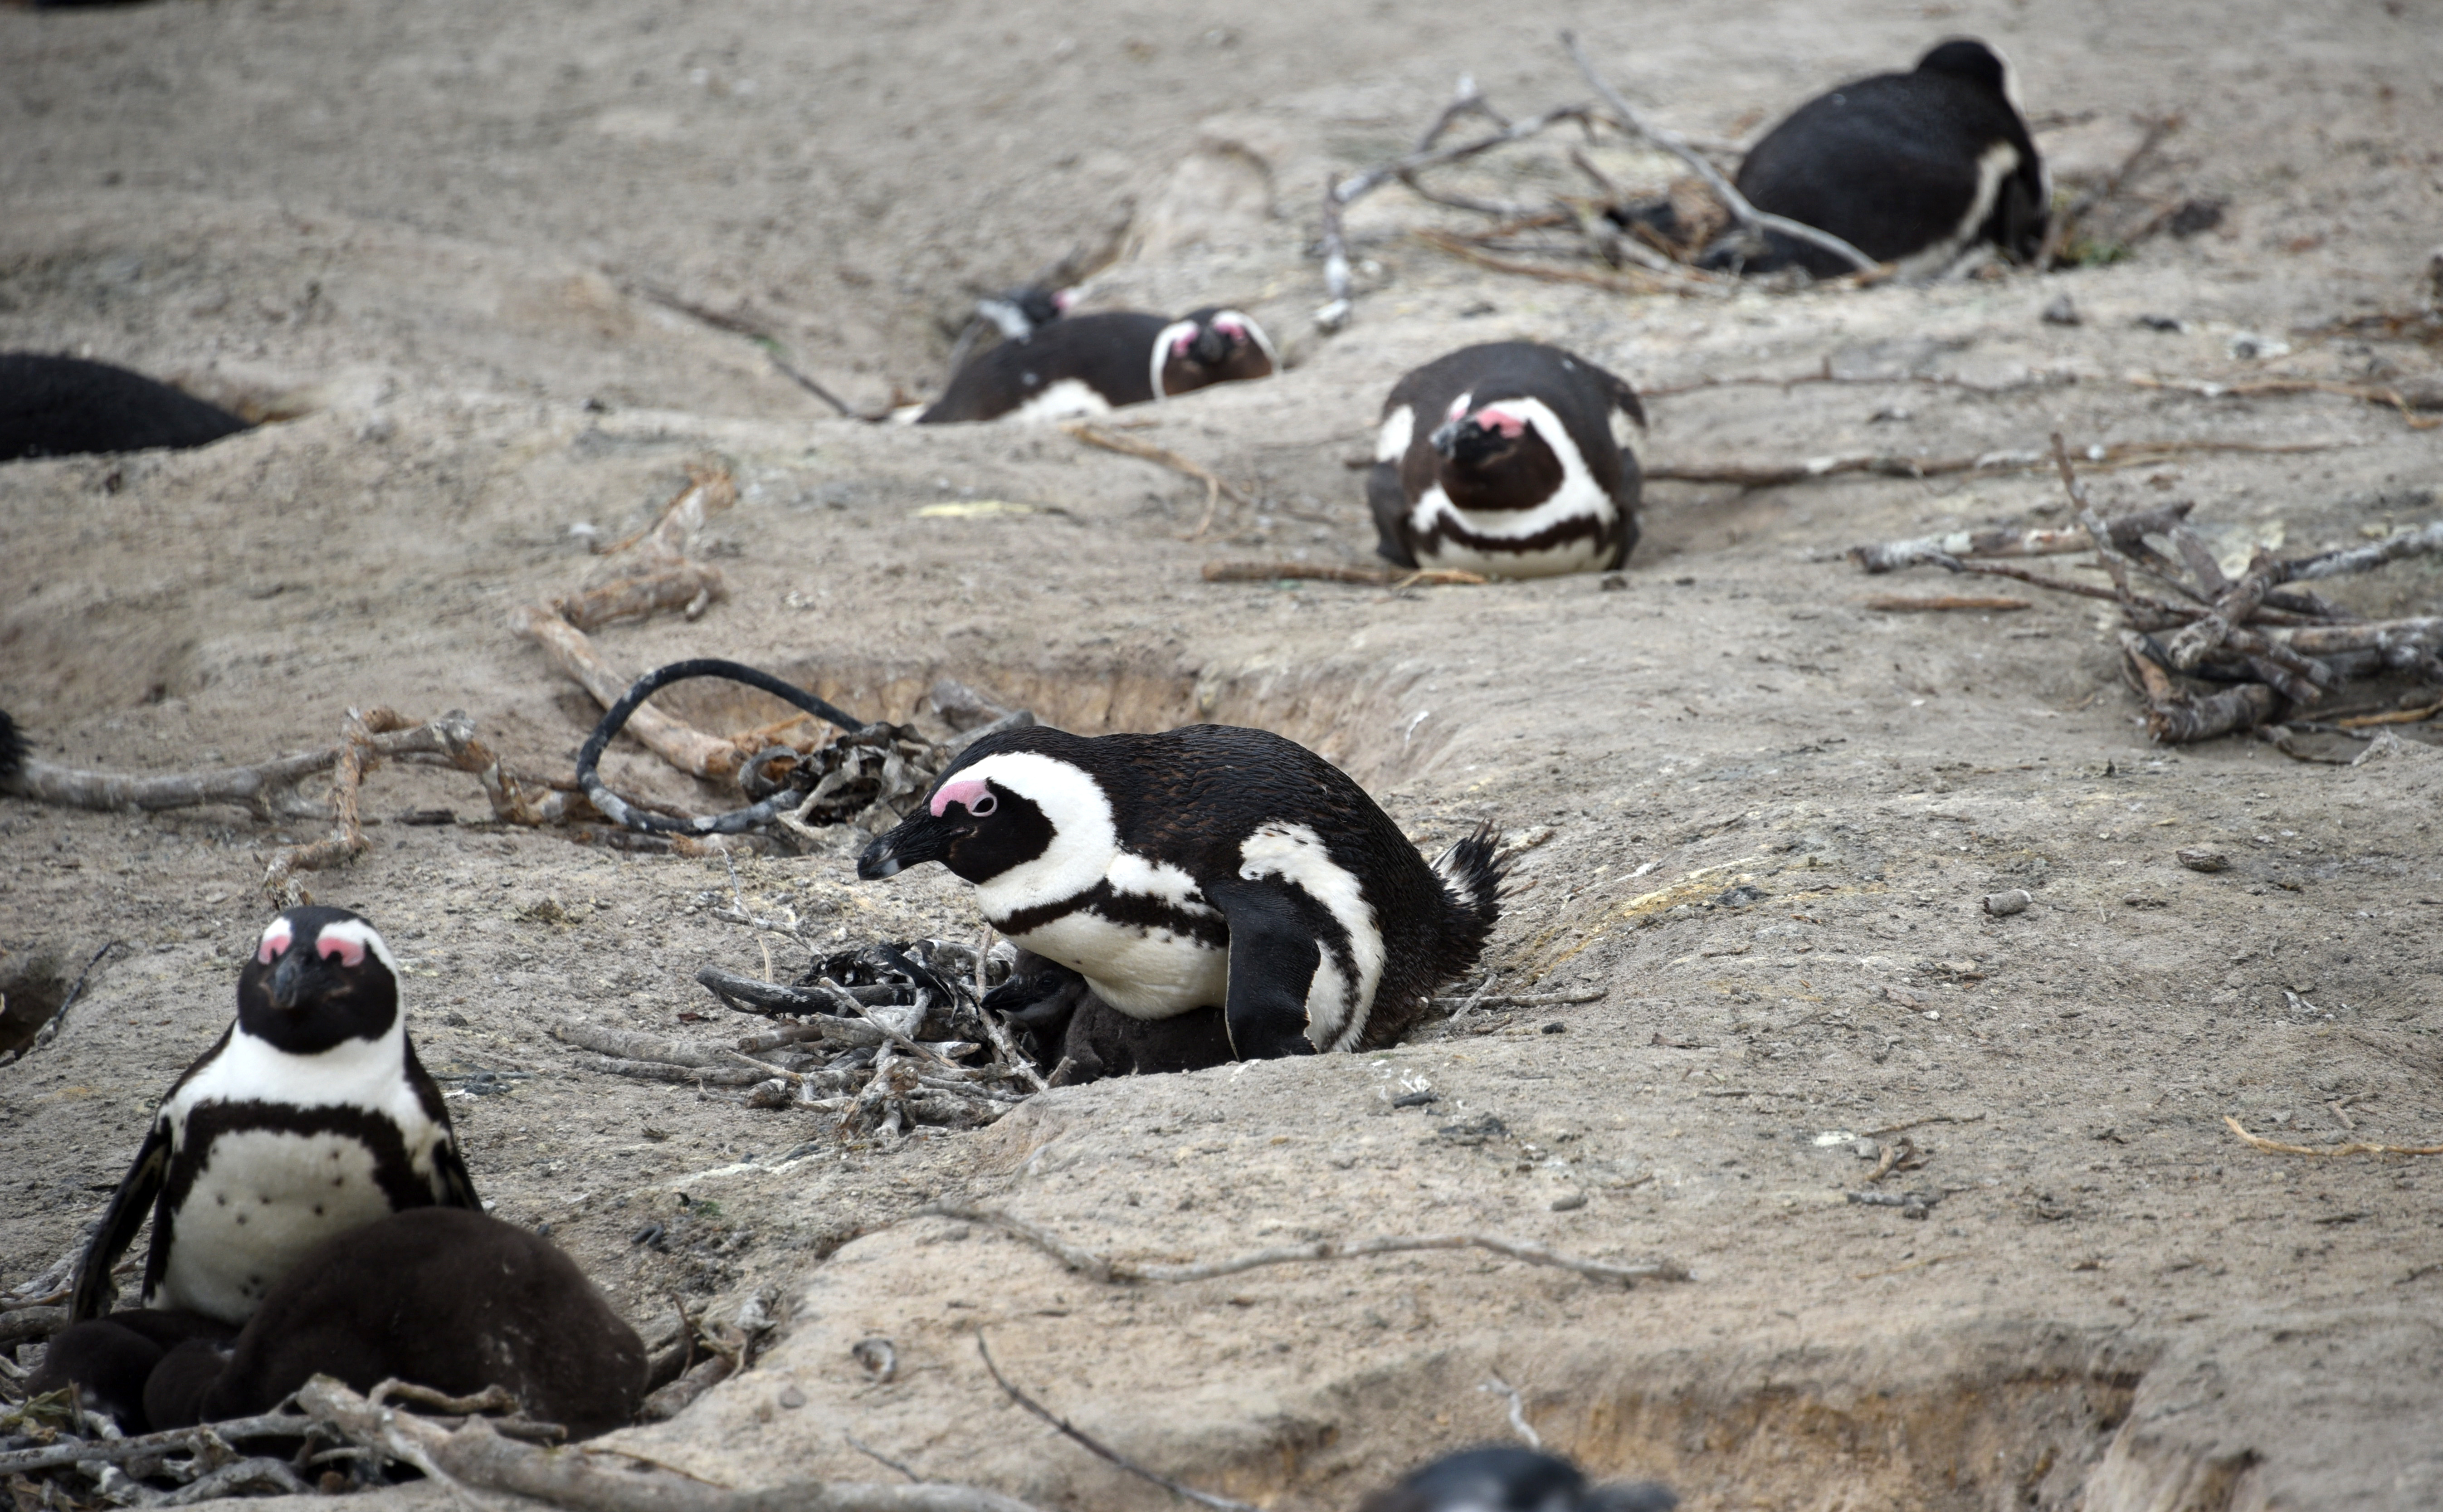 Boulders Penguin Colony In South Africa - Story At Every Corner